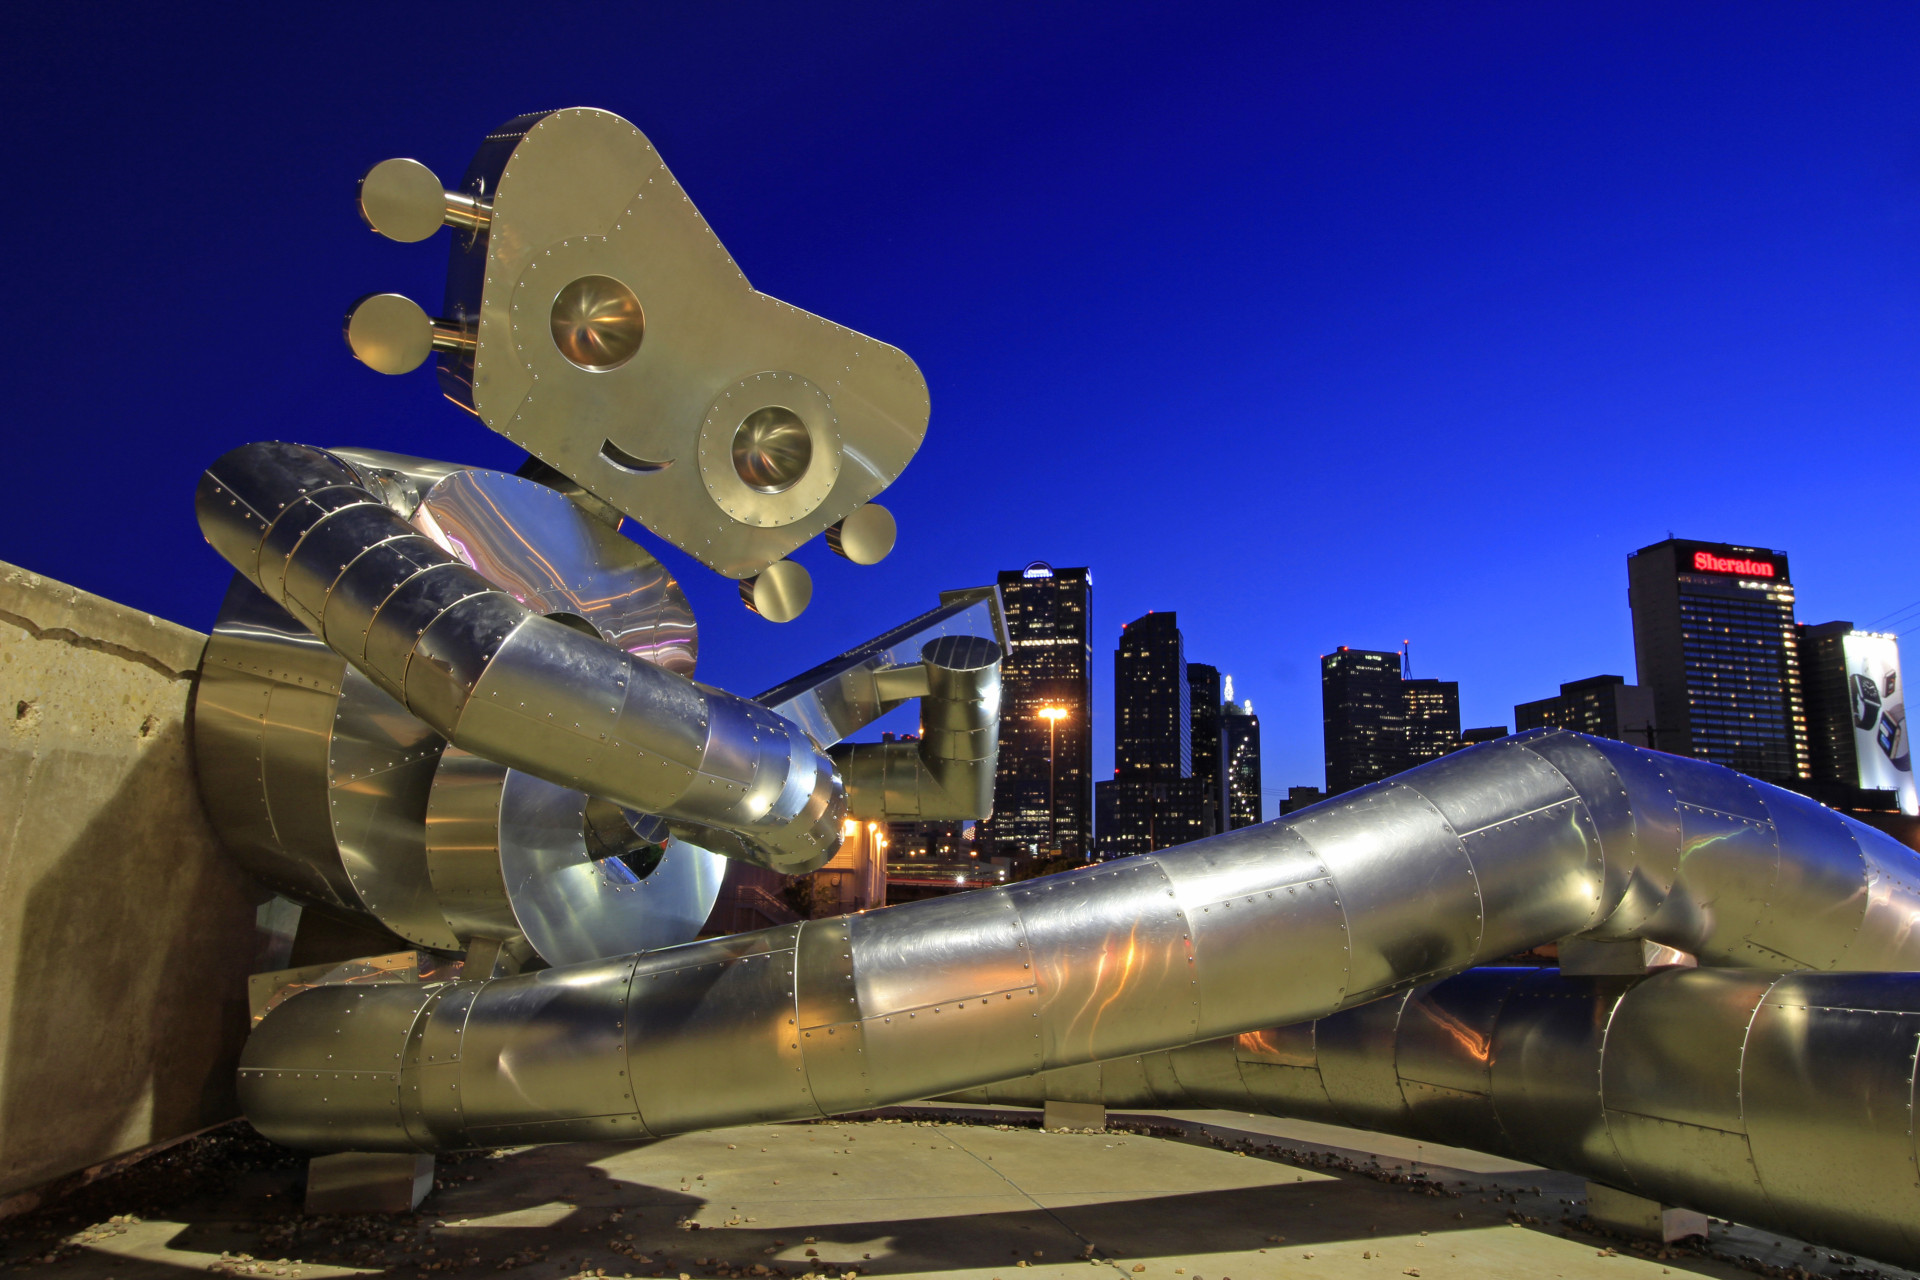 Gaze up at The Traveling Man, one of a series of giant sculptures striding across the city's Deep Ellum neighborhood.<p><a href="https://www.msn.com/en-us/community/channel/vid-7xx8mnucu55yw63we9va2gwr7uihbxwc68fxqp25x6tg4ftibpra?cvid=94631541bc0f4f89bfd59158d696ad7e">Follow us and access great exclusive content every day</a></p>